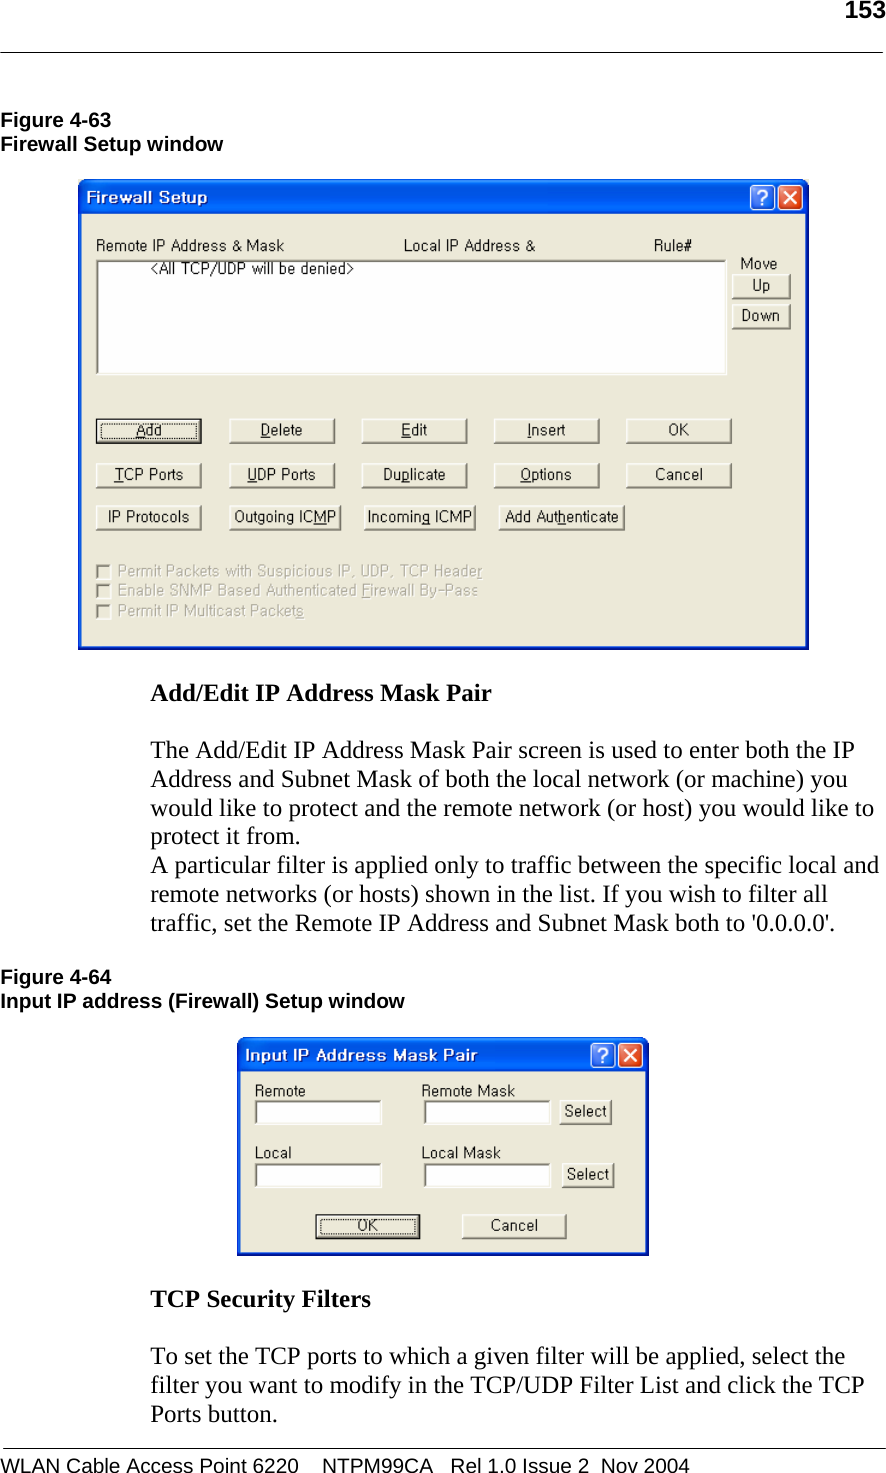   153  WLAN Cable Access Point 6220    NTPM99CA   Rel 1.0 Issue 2  Nov 2004 Figure 4-63 Firewall Setup window    Add/Edit IP Address Mask Pair   The Add/Edit IP Address Mask Pair screen is used to enter both the IP Address and Subnet Mask of both the local network (or machine) you would like to protect and the remote network (or host) you would like to protect it from. A particular filter is applied only to traffic between the specific local and remote networks (or hosts) shown in the list. If you wish to filter all traffic, set the Remote IP Address and Subnet Mask both to &apos;0.0.0.0&apos;.  Figure 4-64 Input IP address (Firewall) Setup window    TCP Security Filters   To set the TCP ports to which a given filter will be applied, select the filter you want to modify in the TCP/UDP Filter List and click the TCP Ports button. 